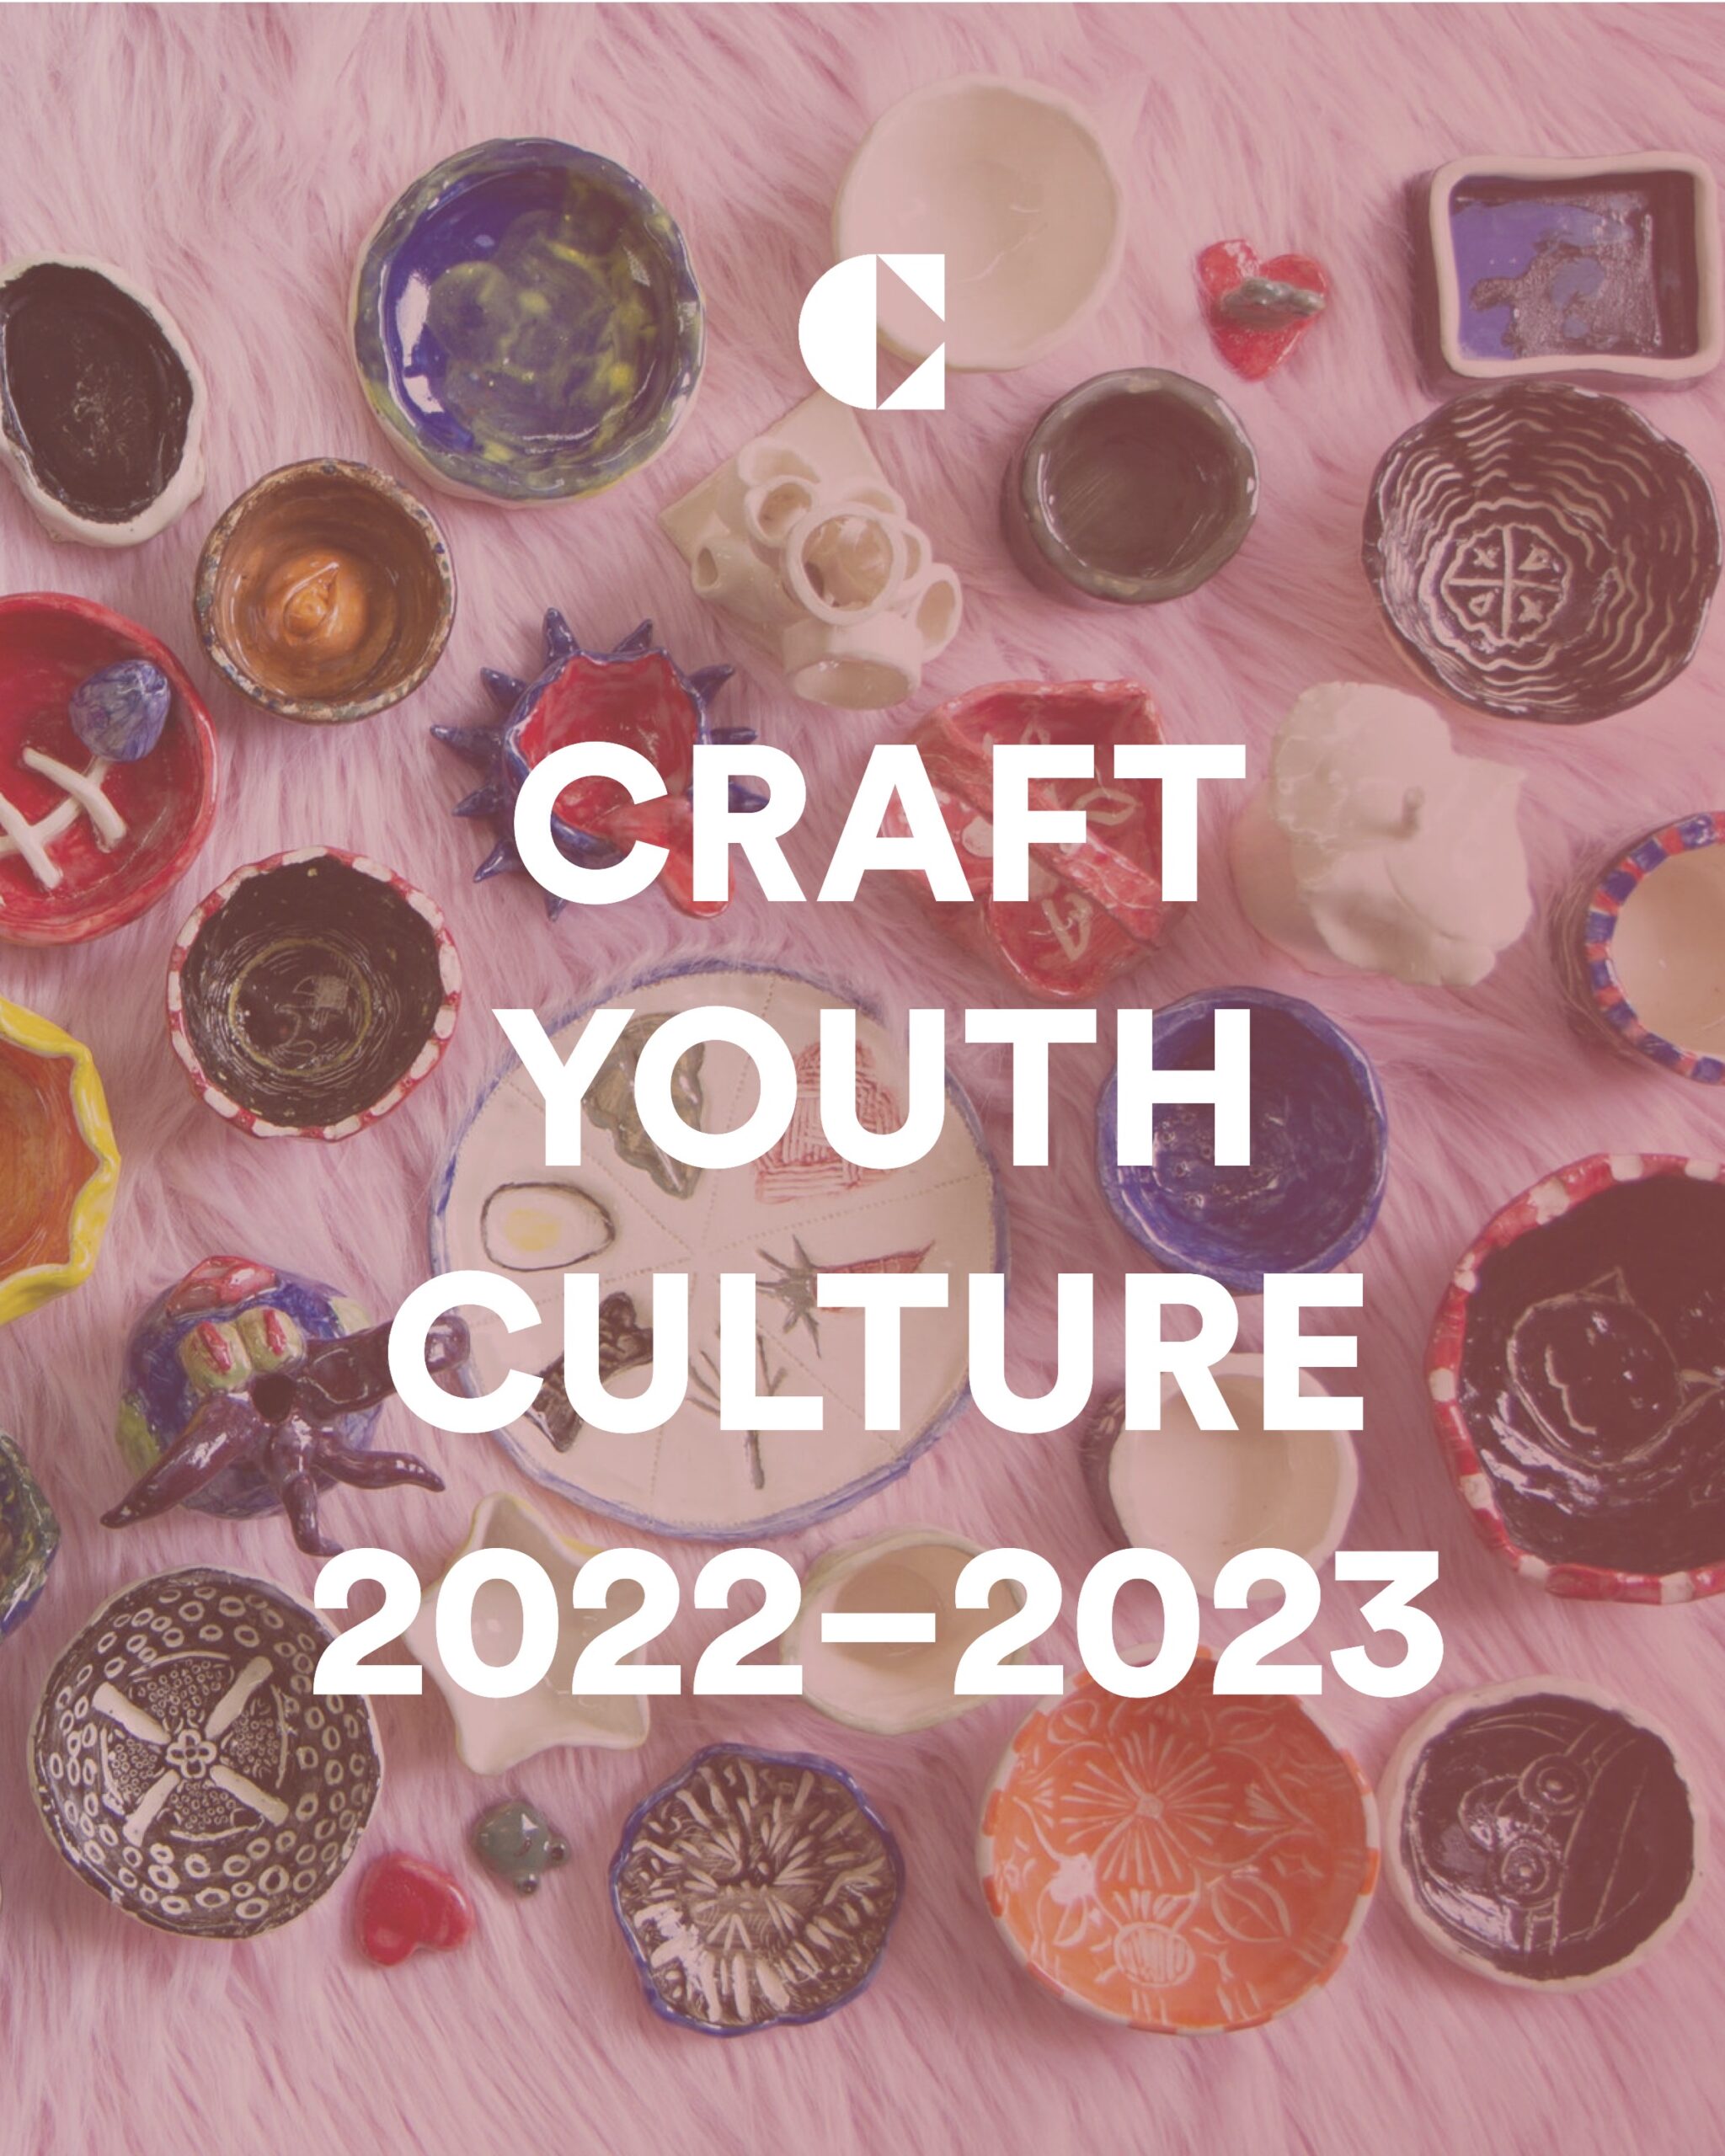 Check out the Craft Youth Culture 2022 - 23 Catalog!